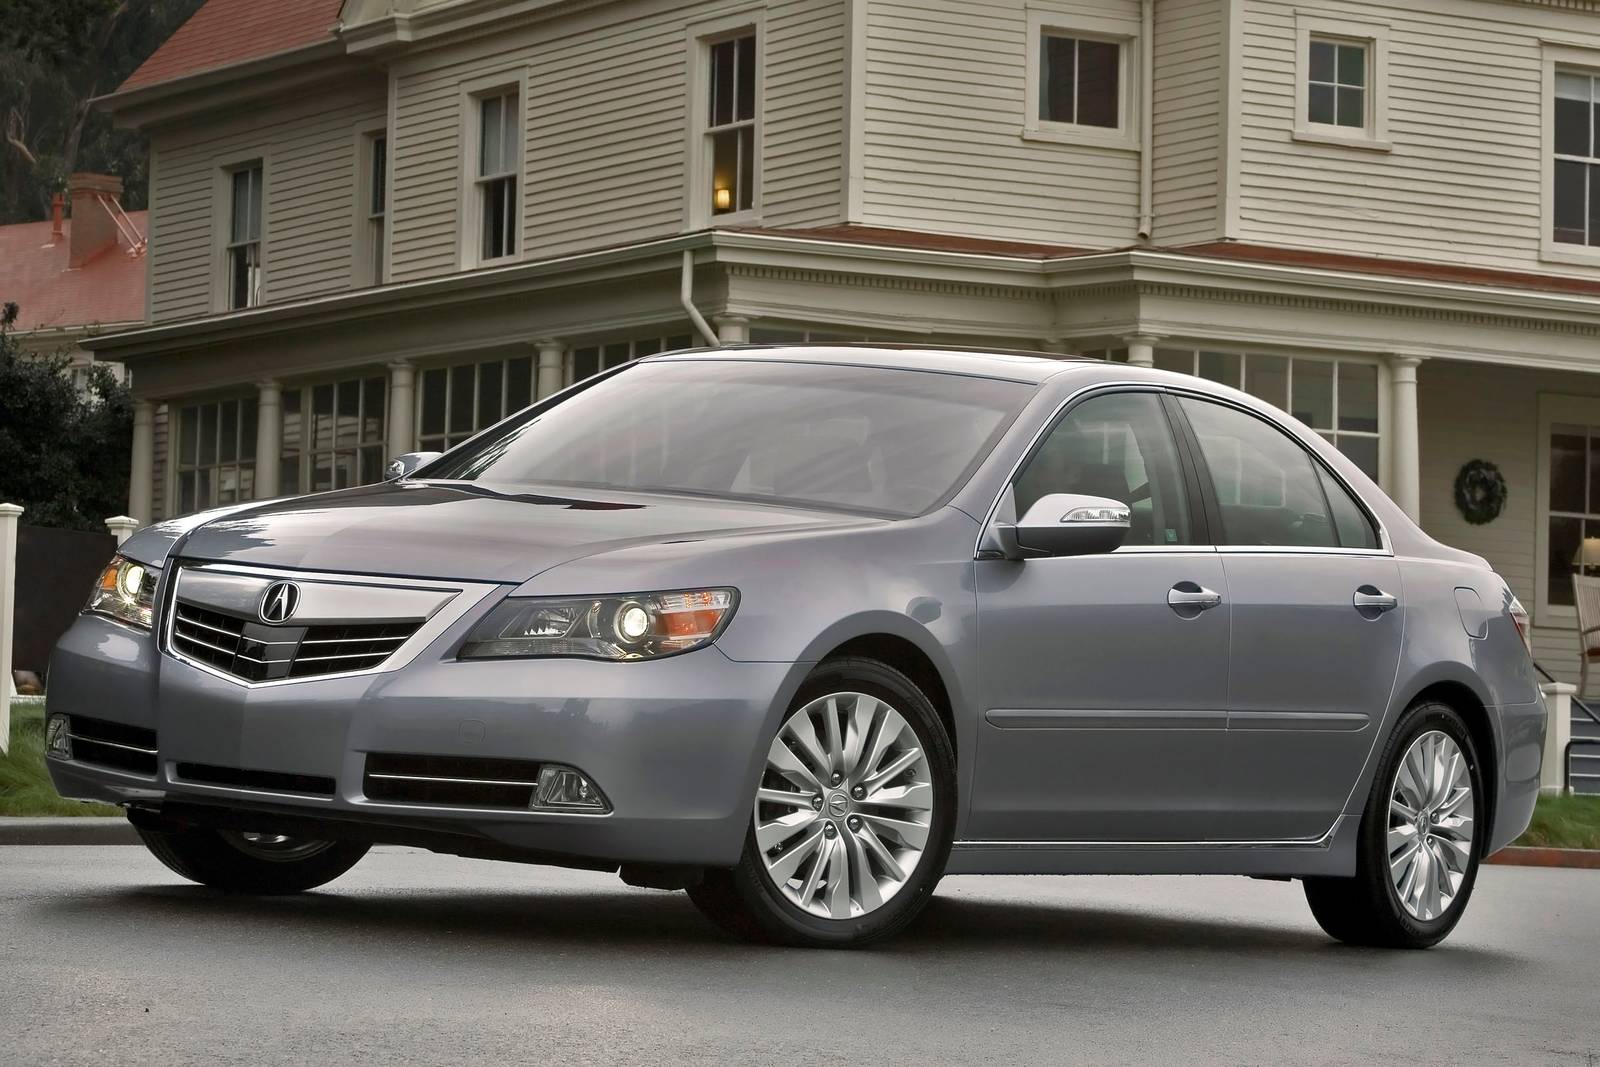 2012 Acura RL Review & Ratings | Edmunds